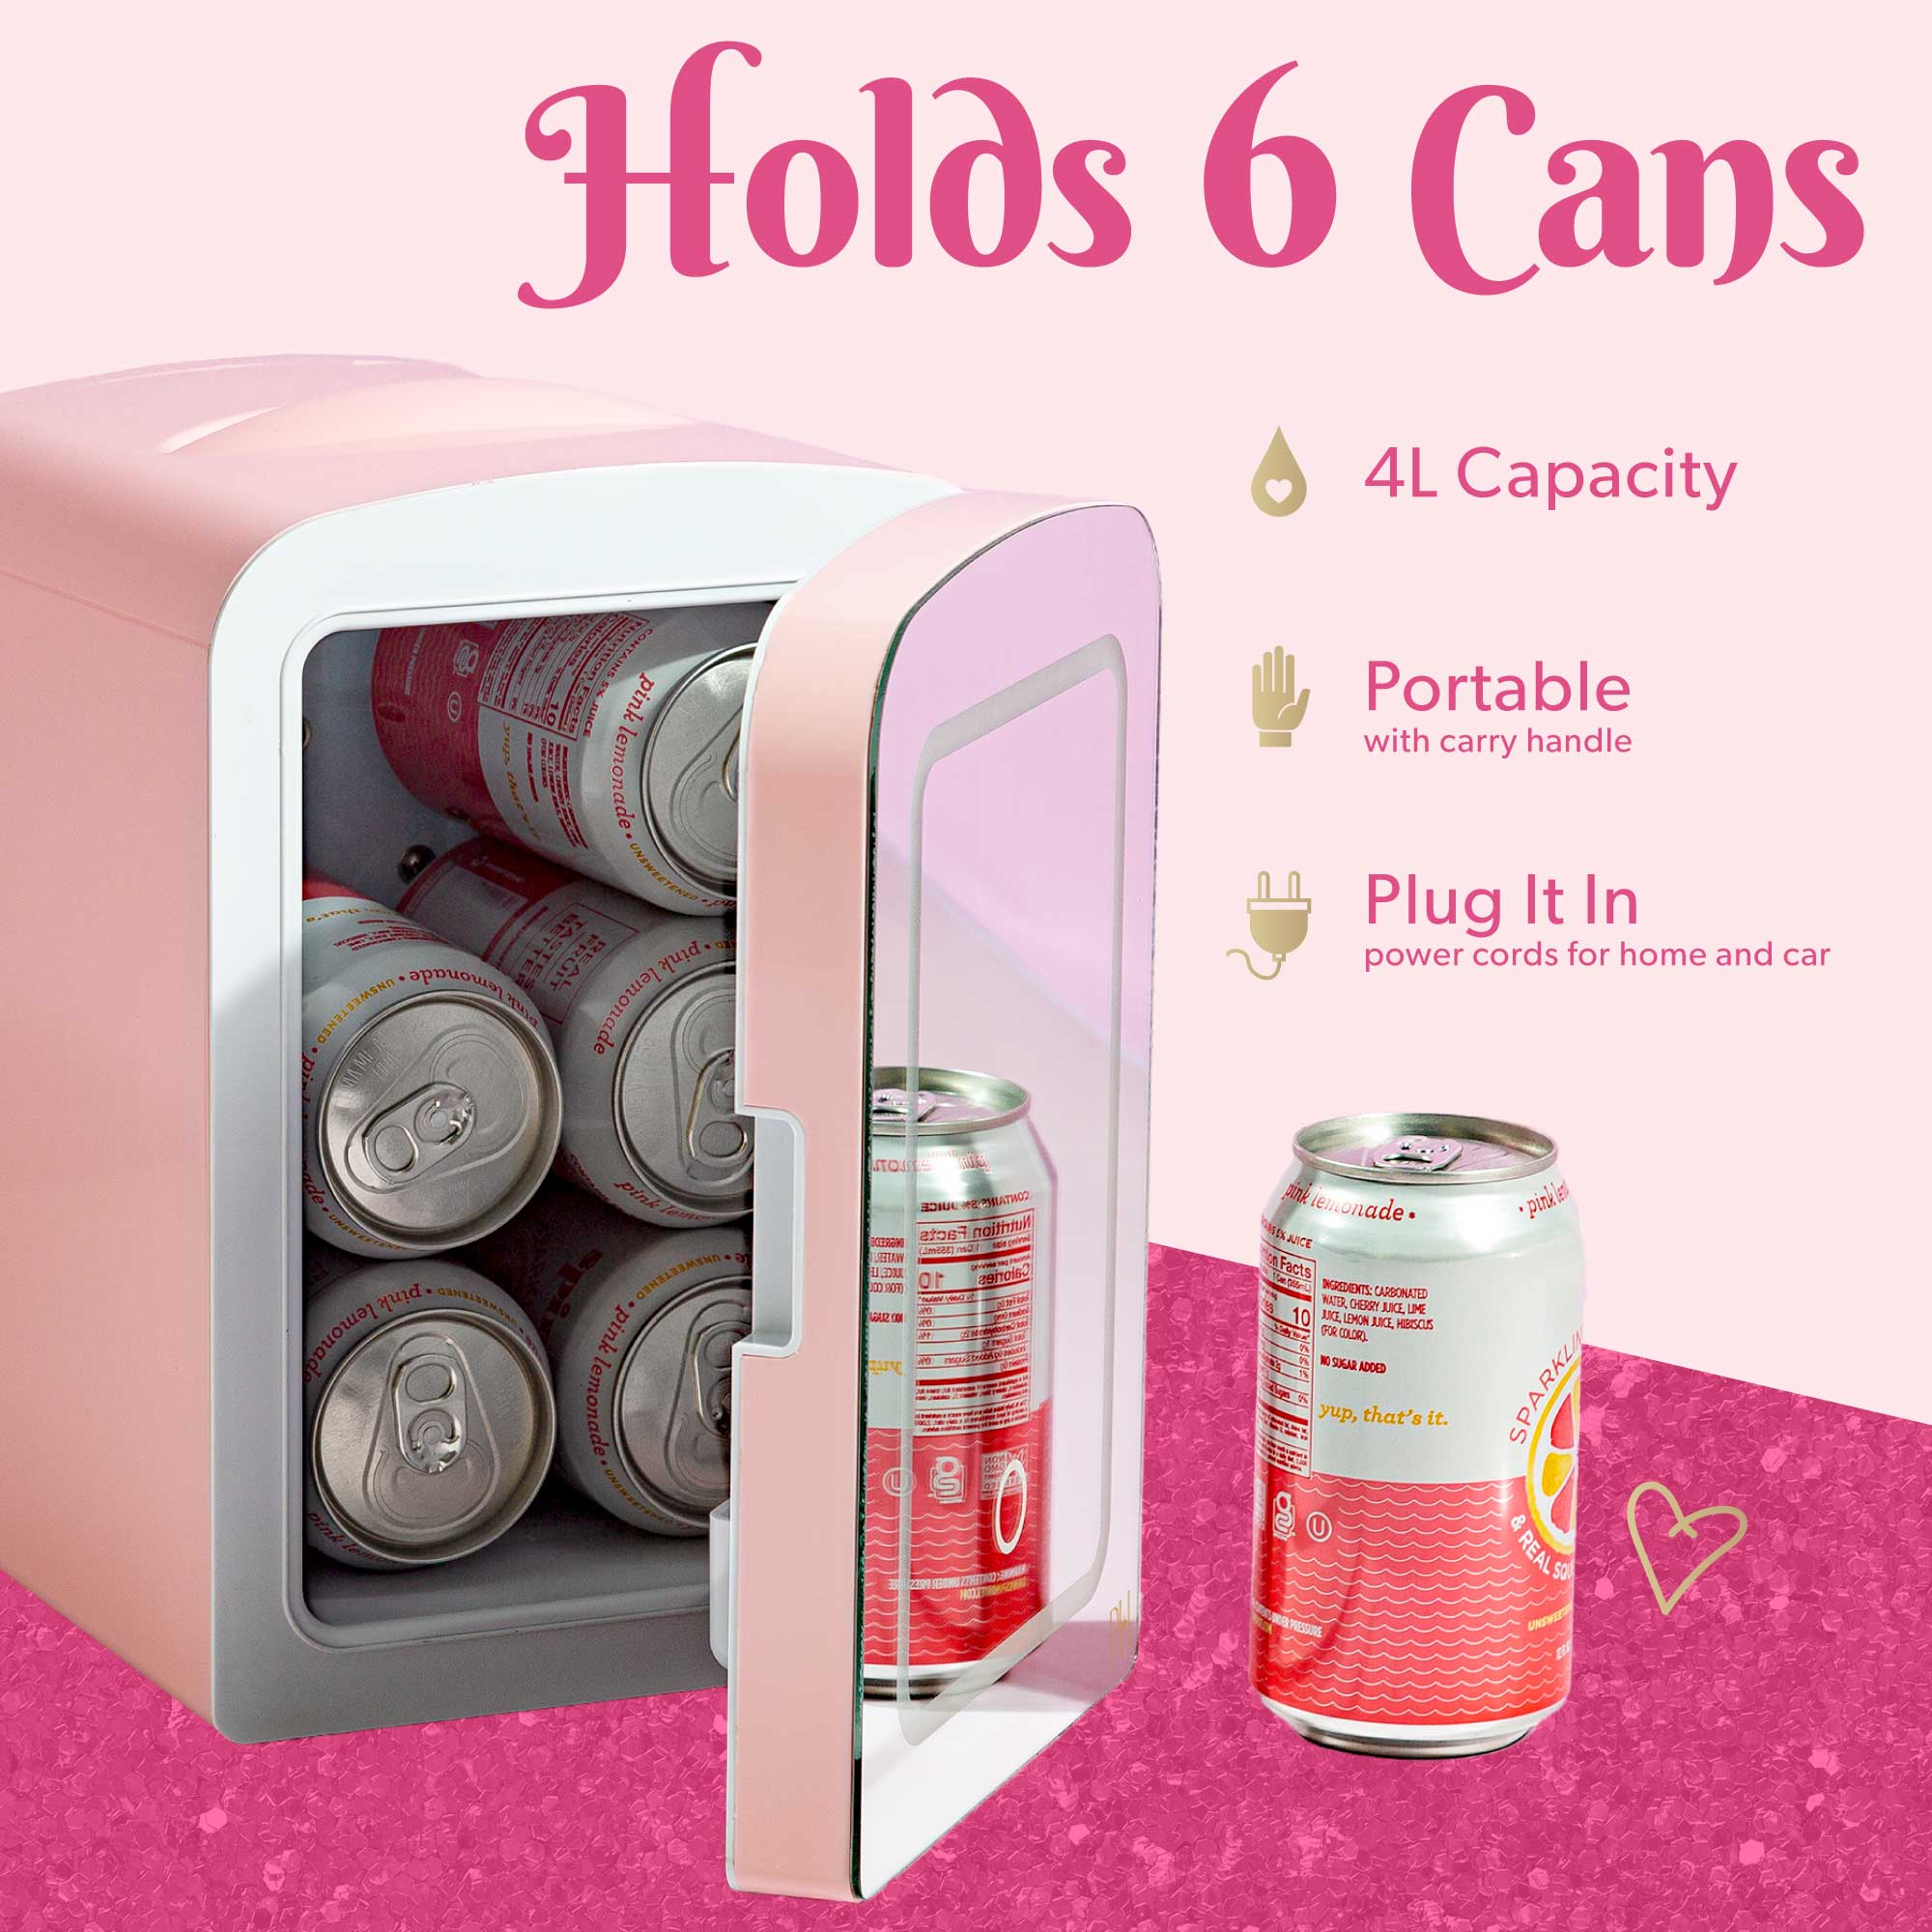 Paris Hilton Mini Refrigerator and Personal Beauty Fridge, Mirrored Door with Light, 4 Liter, Pink - image 5 of 9